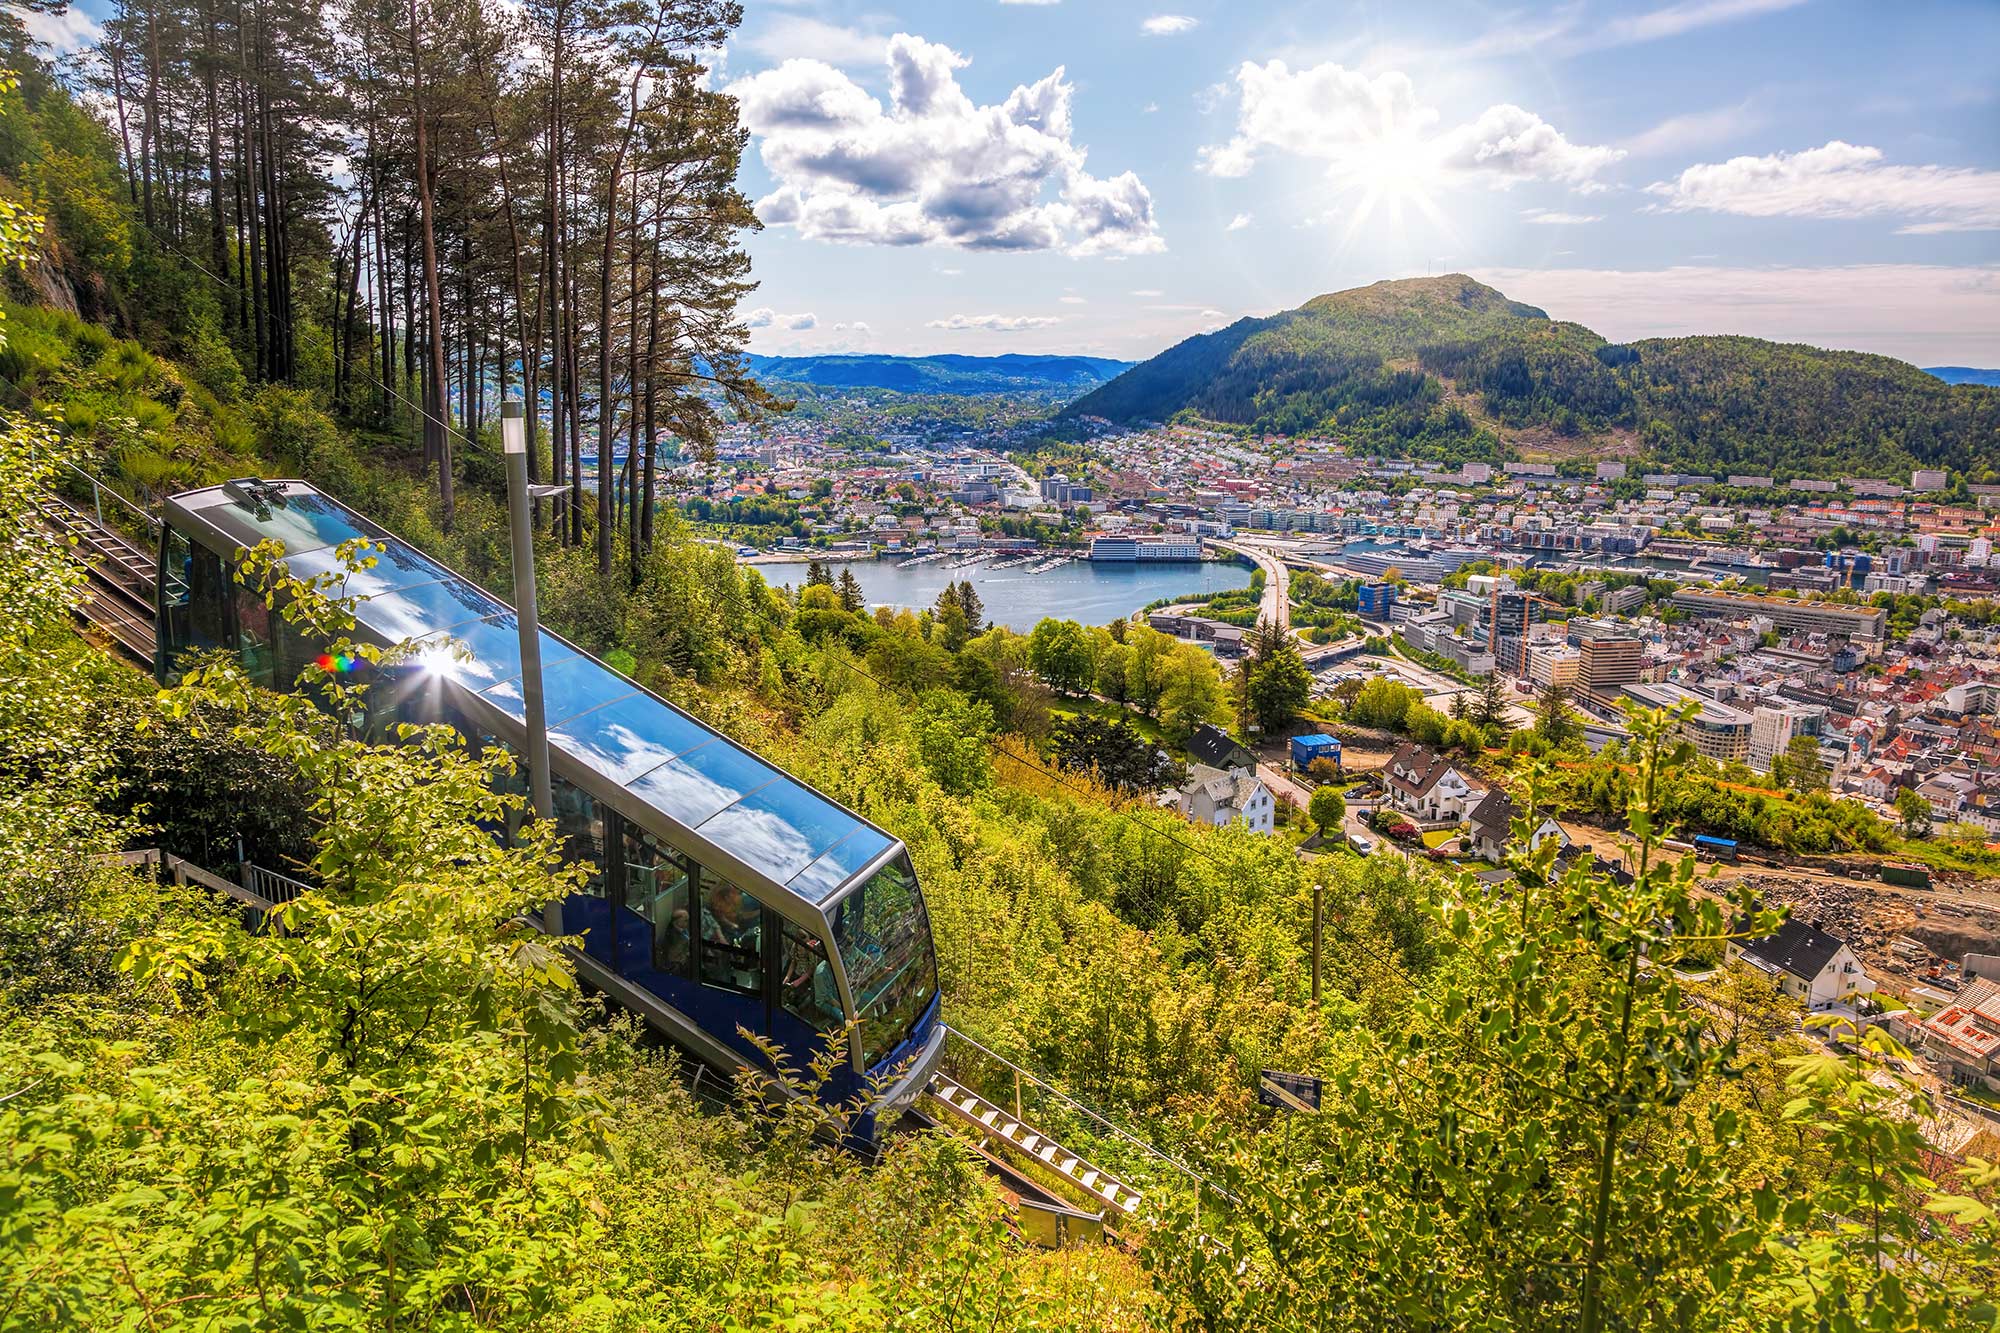 13 of the world's most spectacular Funicular Railways - CK Travels